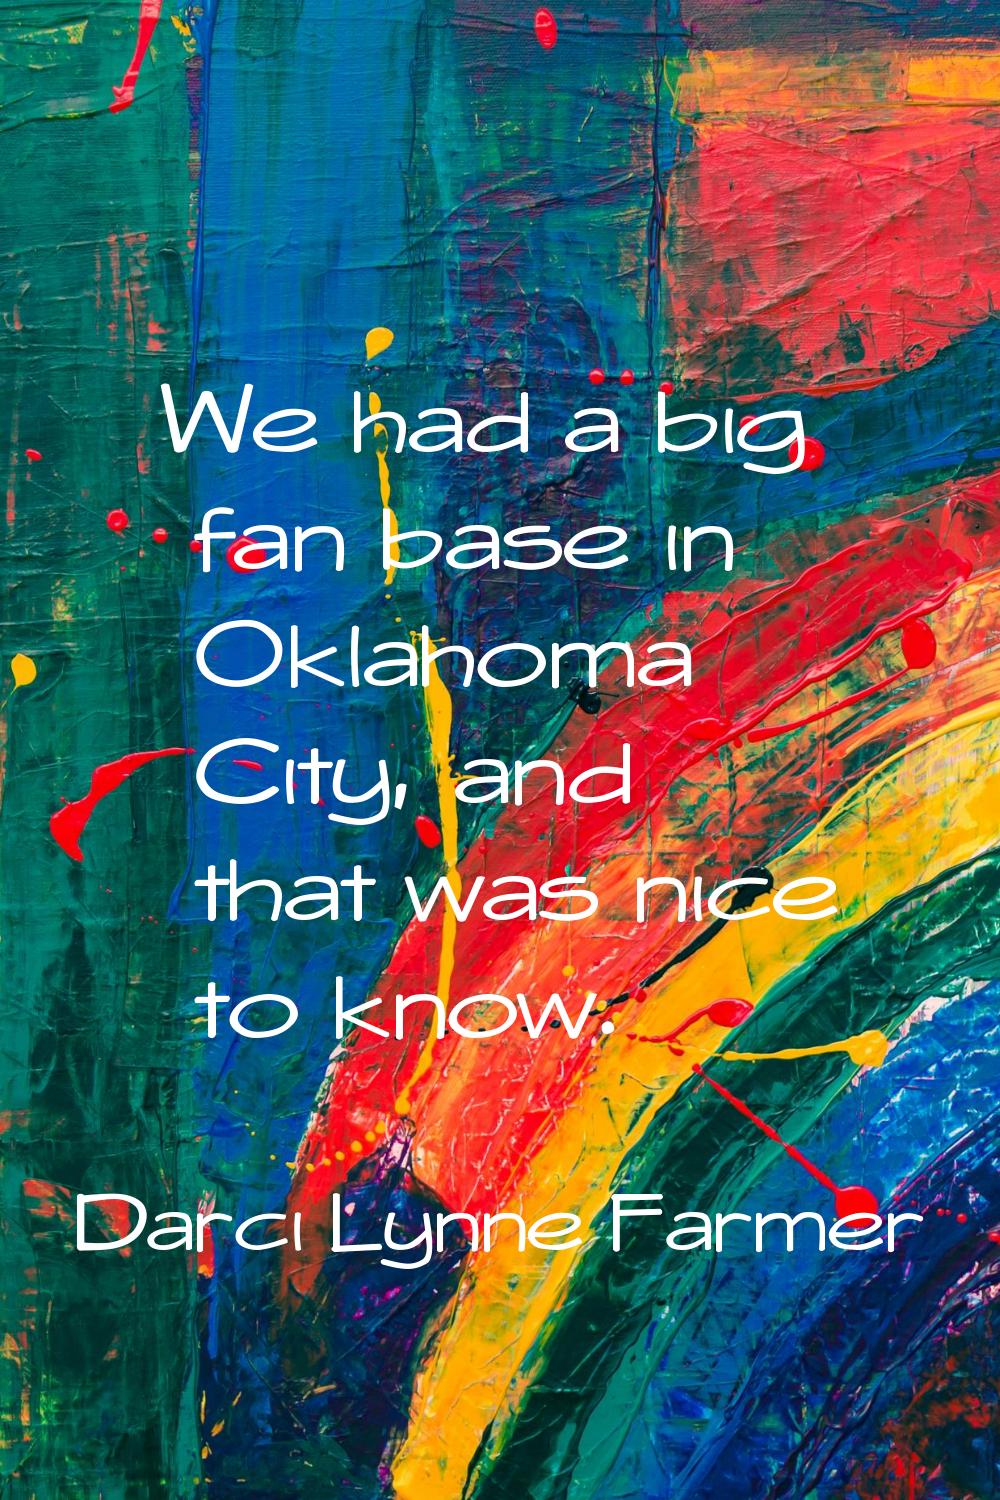 We had a big fan base in Oklahoma City, and that was nice to know.